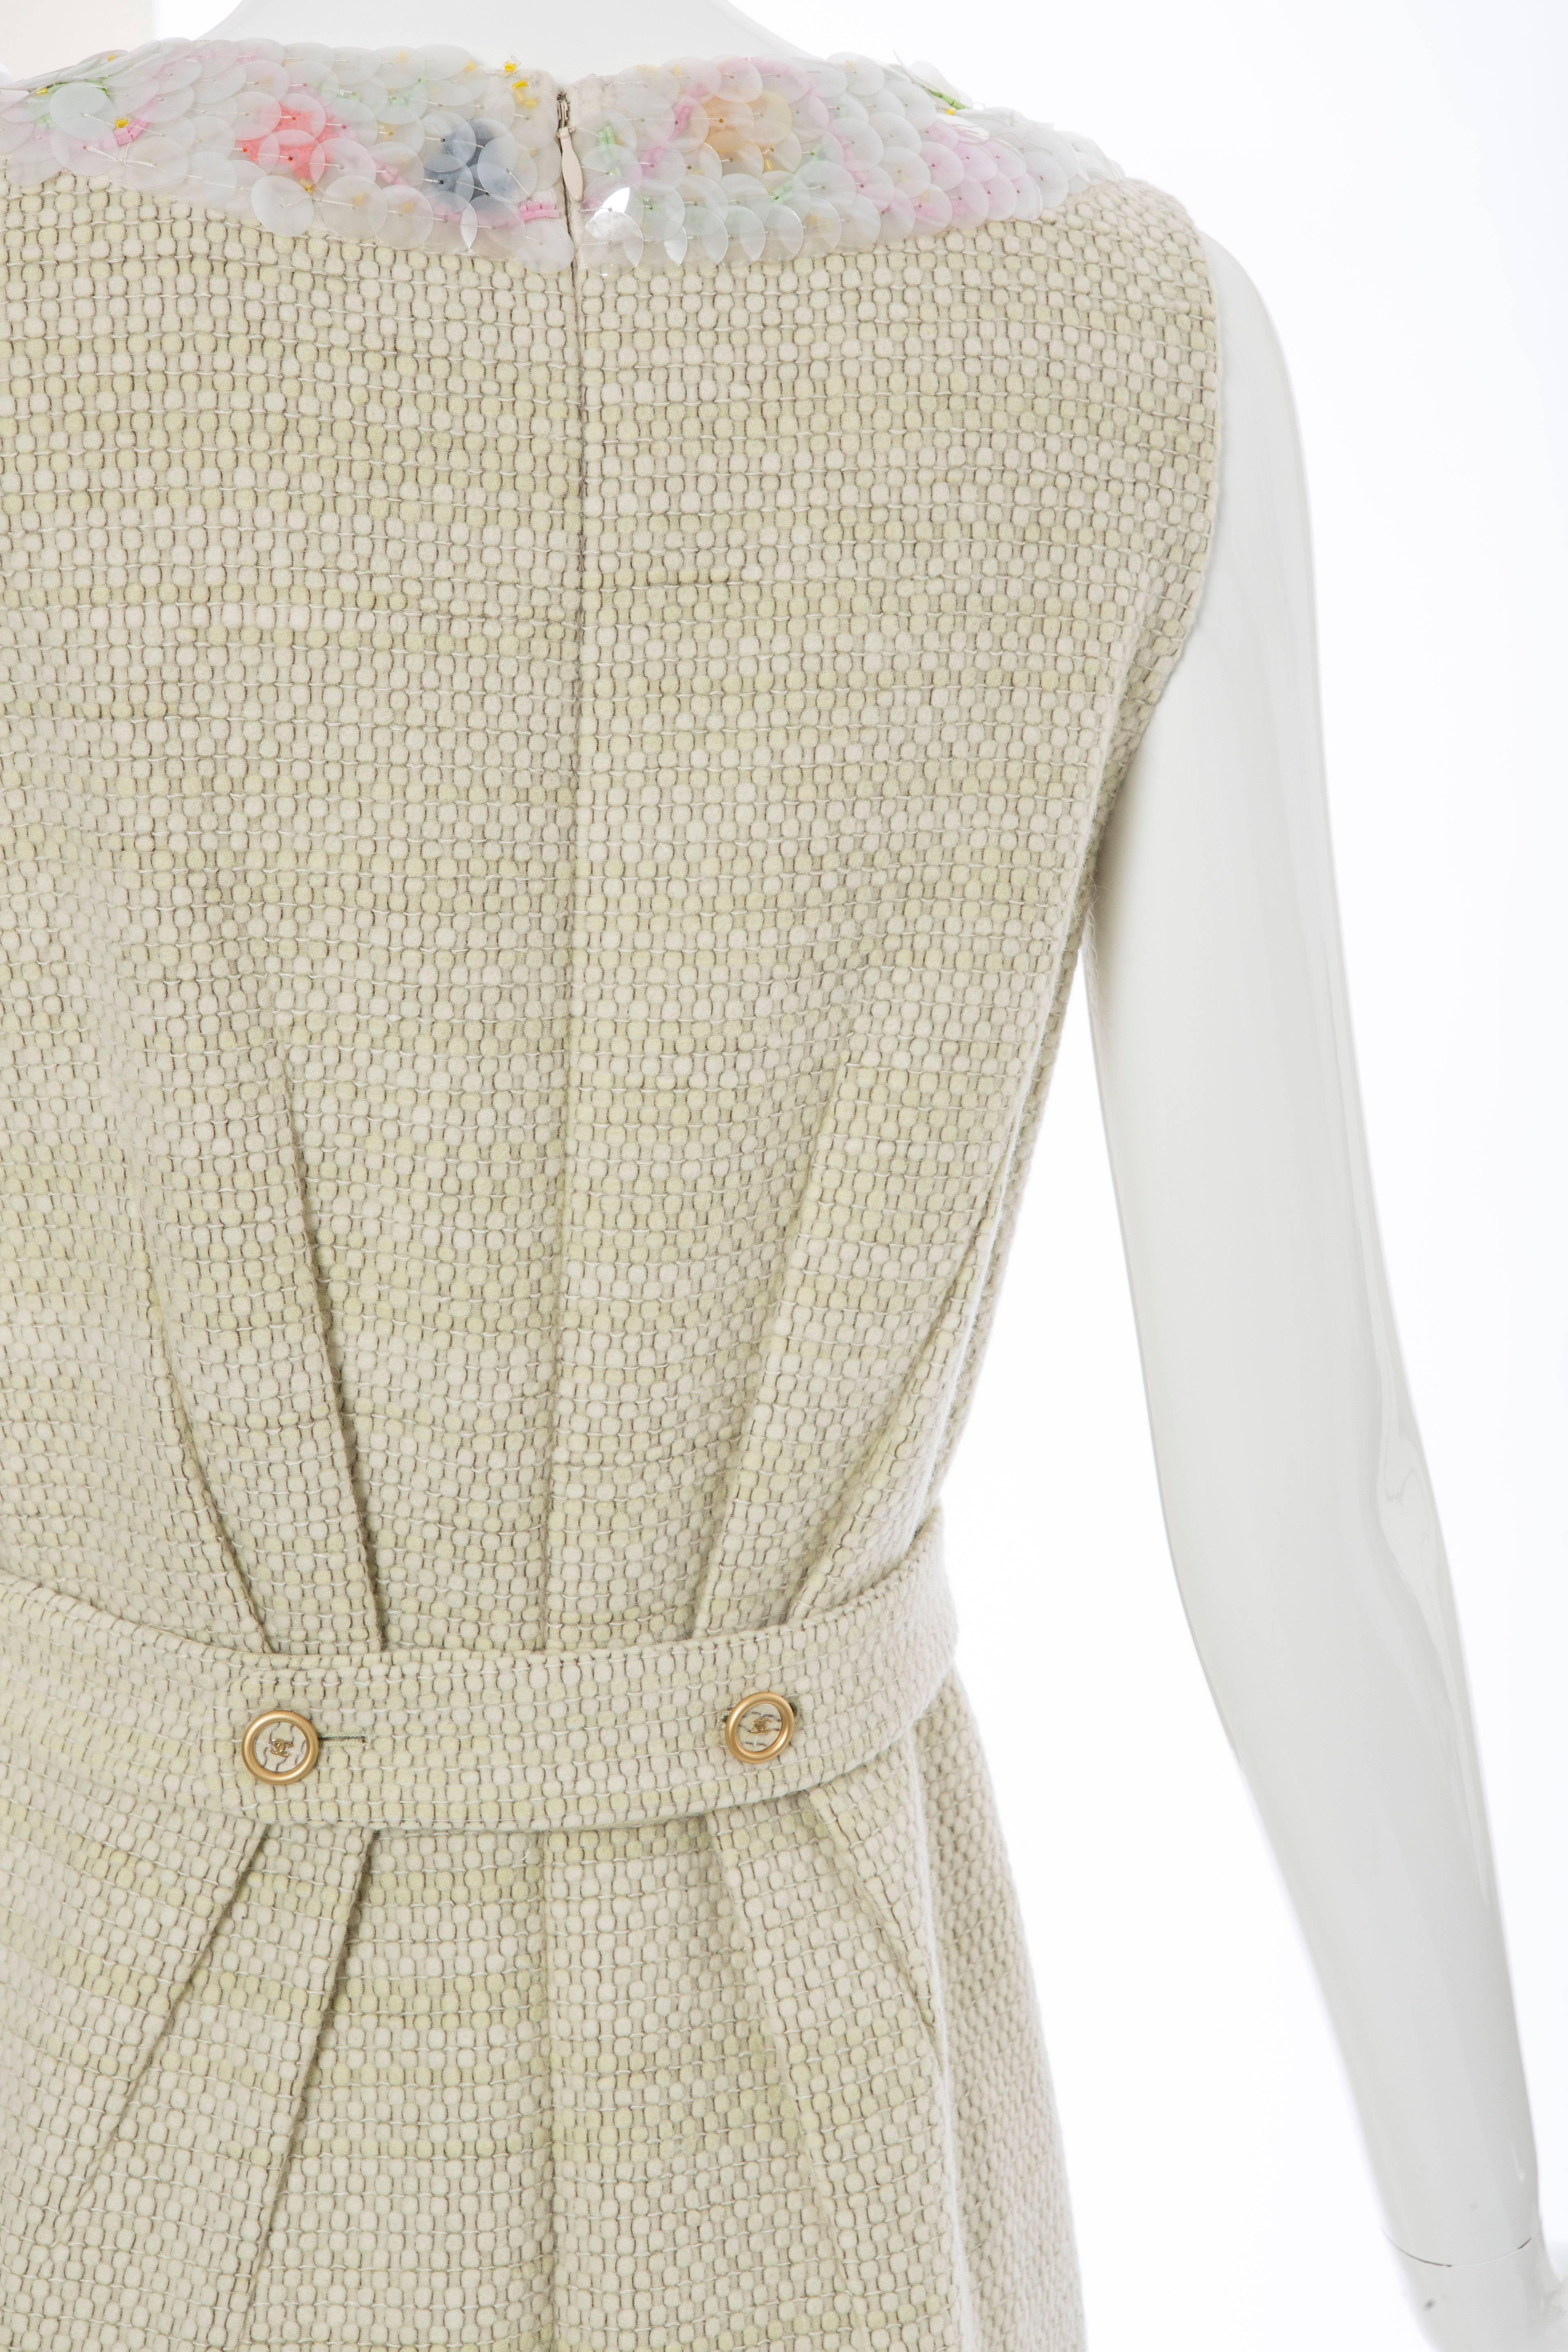 Chanel Wool Tweed Dress Clear Paillettes & Bead Embroidery, Fall 2001 3